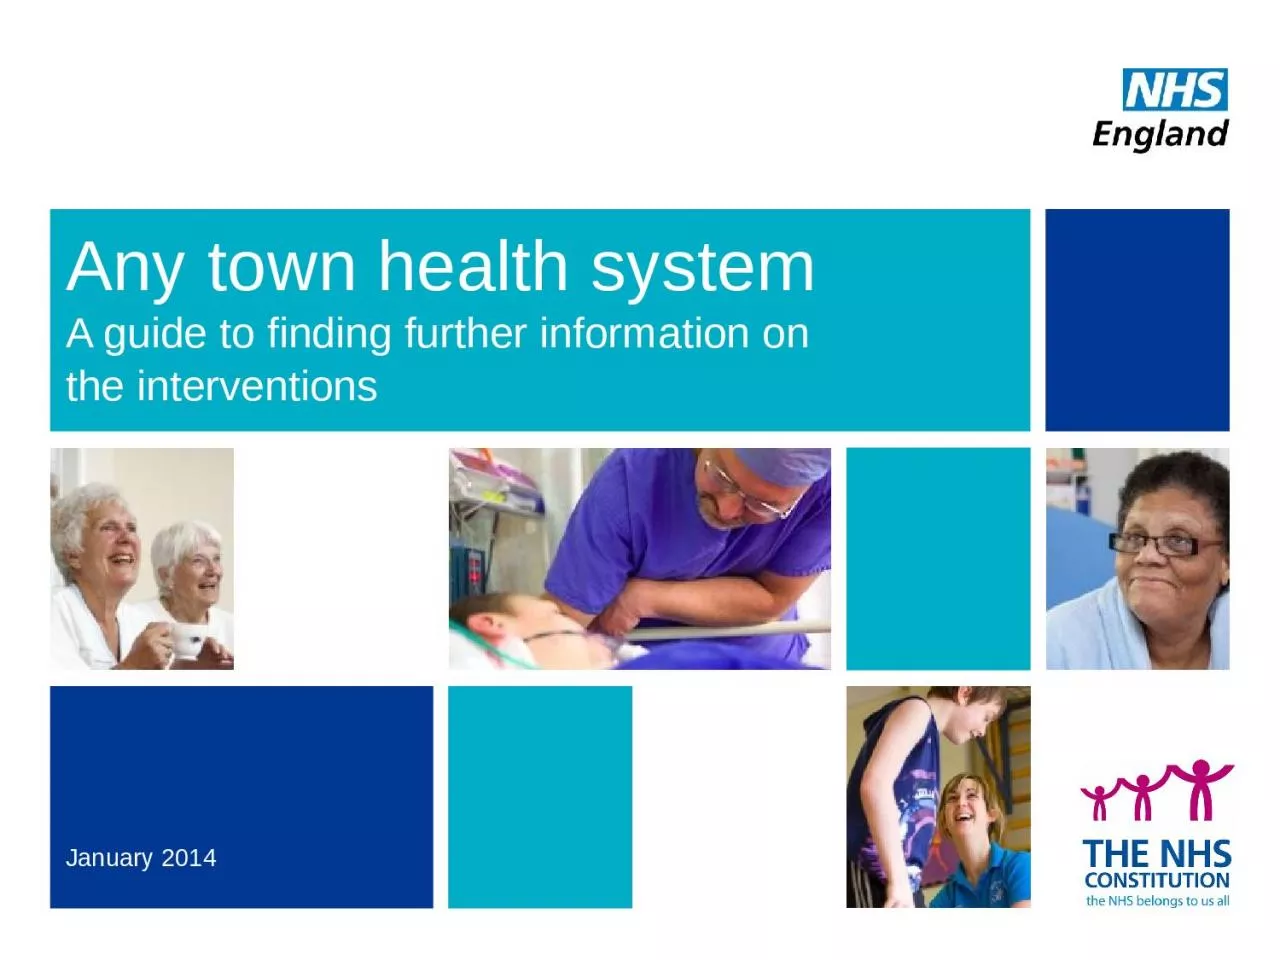 Any town health system A guide to finding further information on the interventions